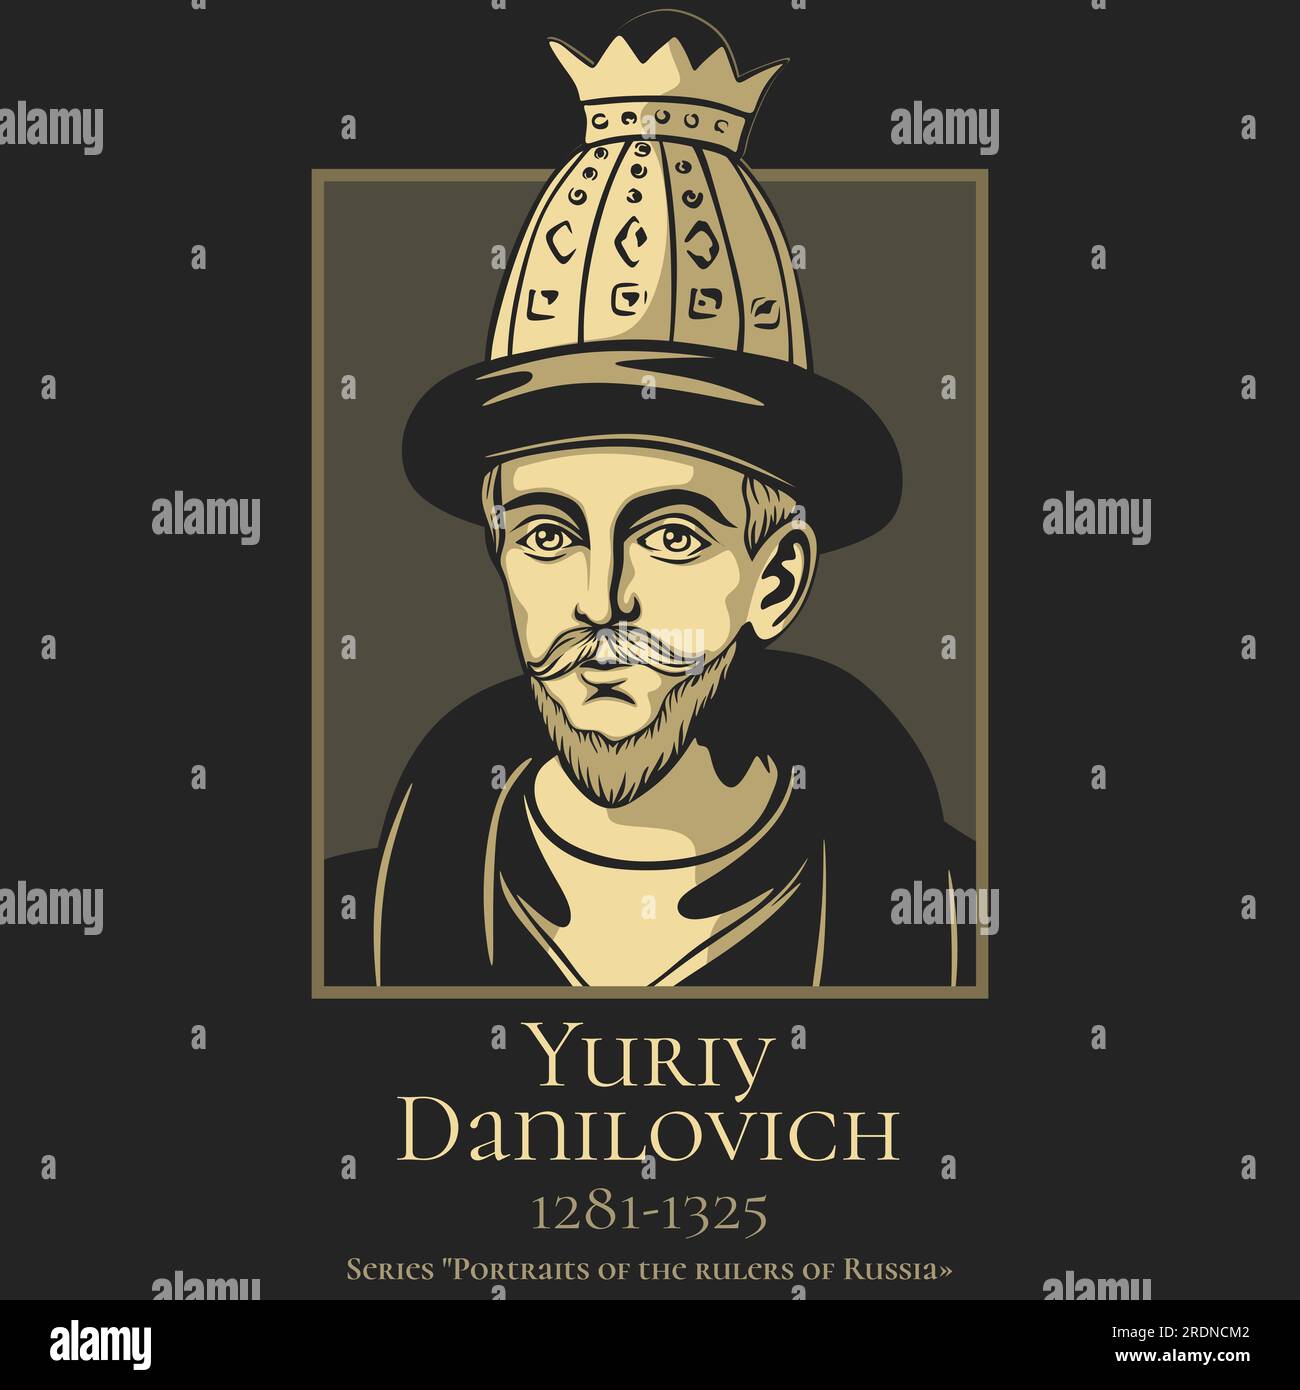 Portrait of the rulers of Russia. Yuriy Danilovich (1281-1325) was Prince of Moscow and Grand Prince of Vladimir. Stock Vector